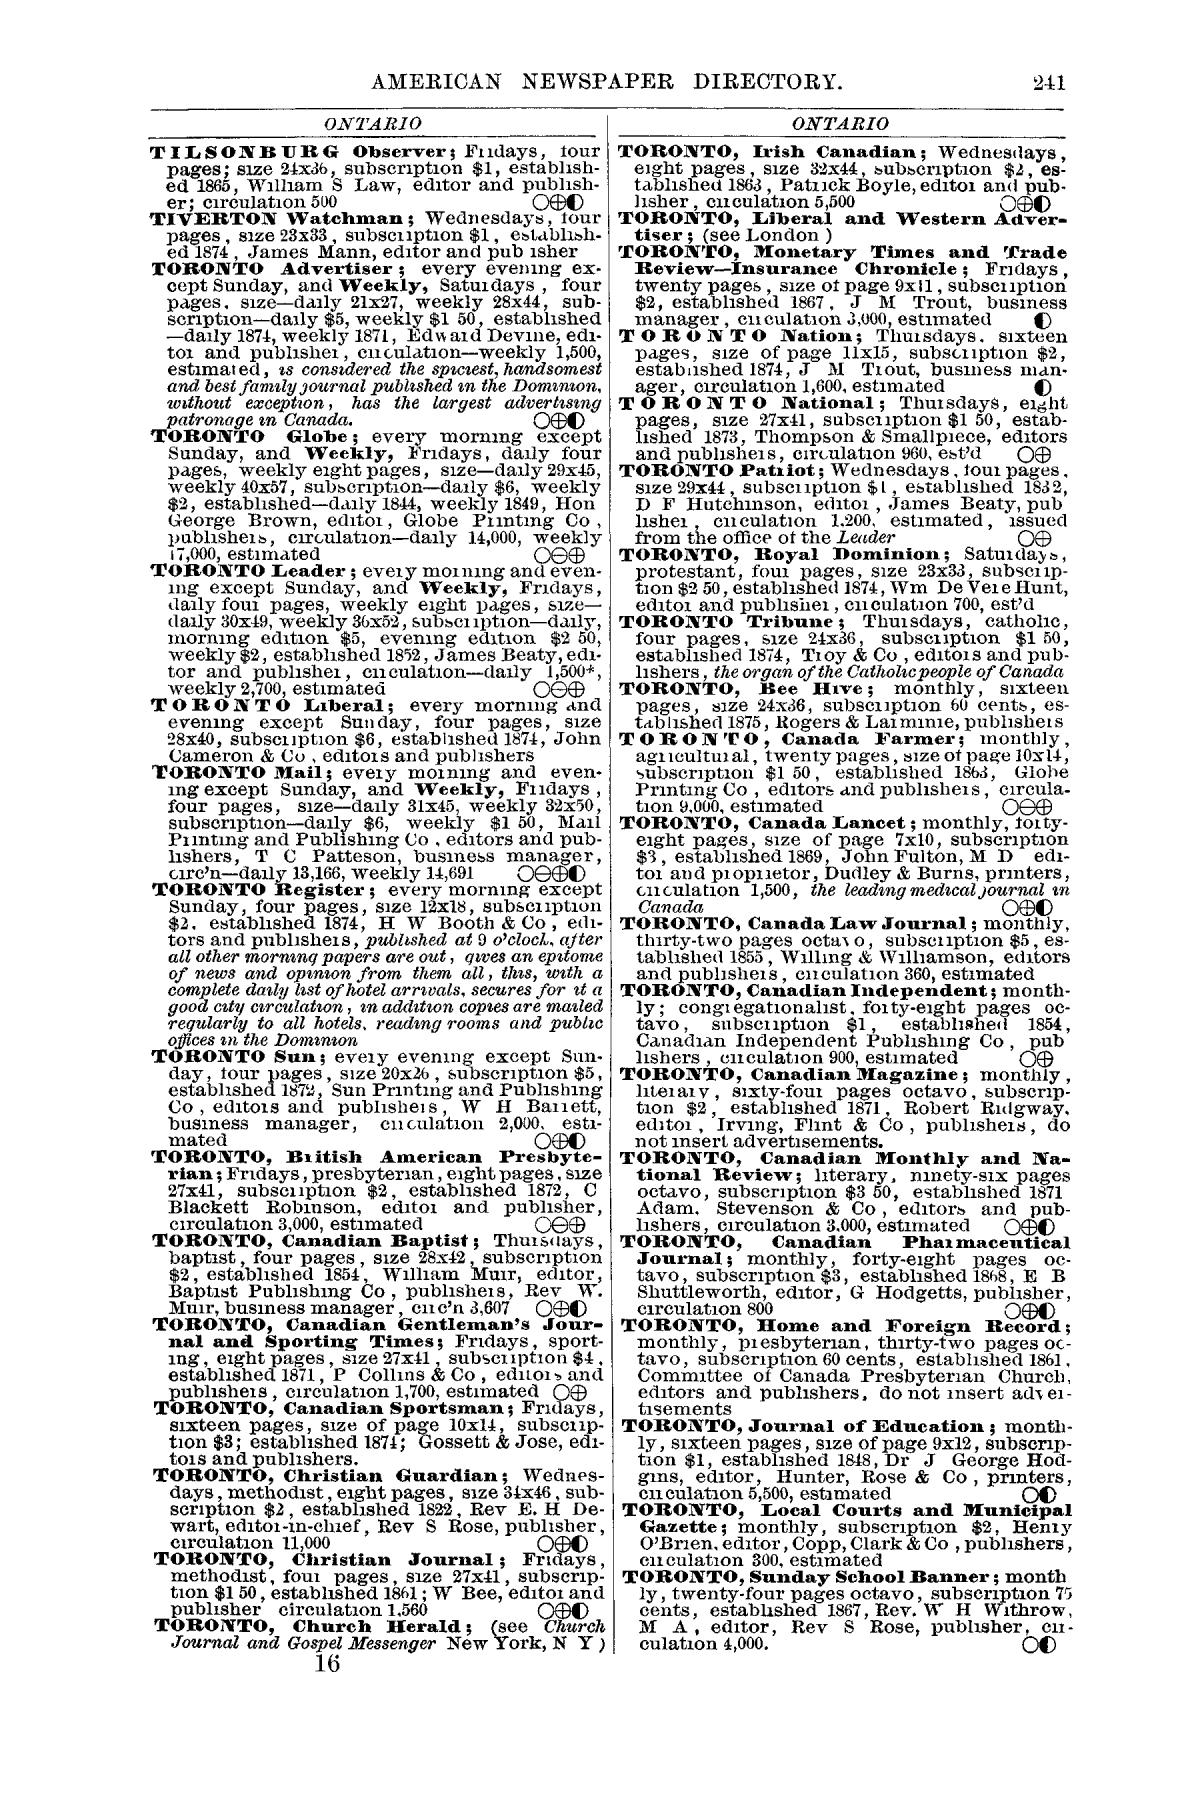 Geo. P. Rowell & Co's American Newspaper Directory, containing Accurate  lists of all the newspapers and periodicals published in the United States  and Territories, and the Dominion of Canada, and British Colonies